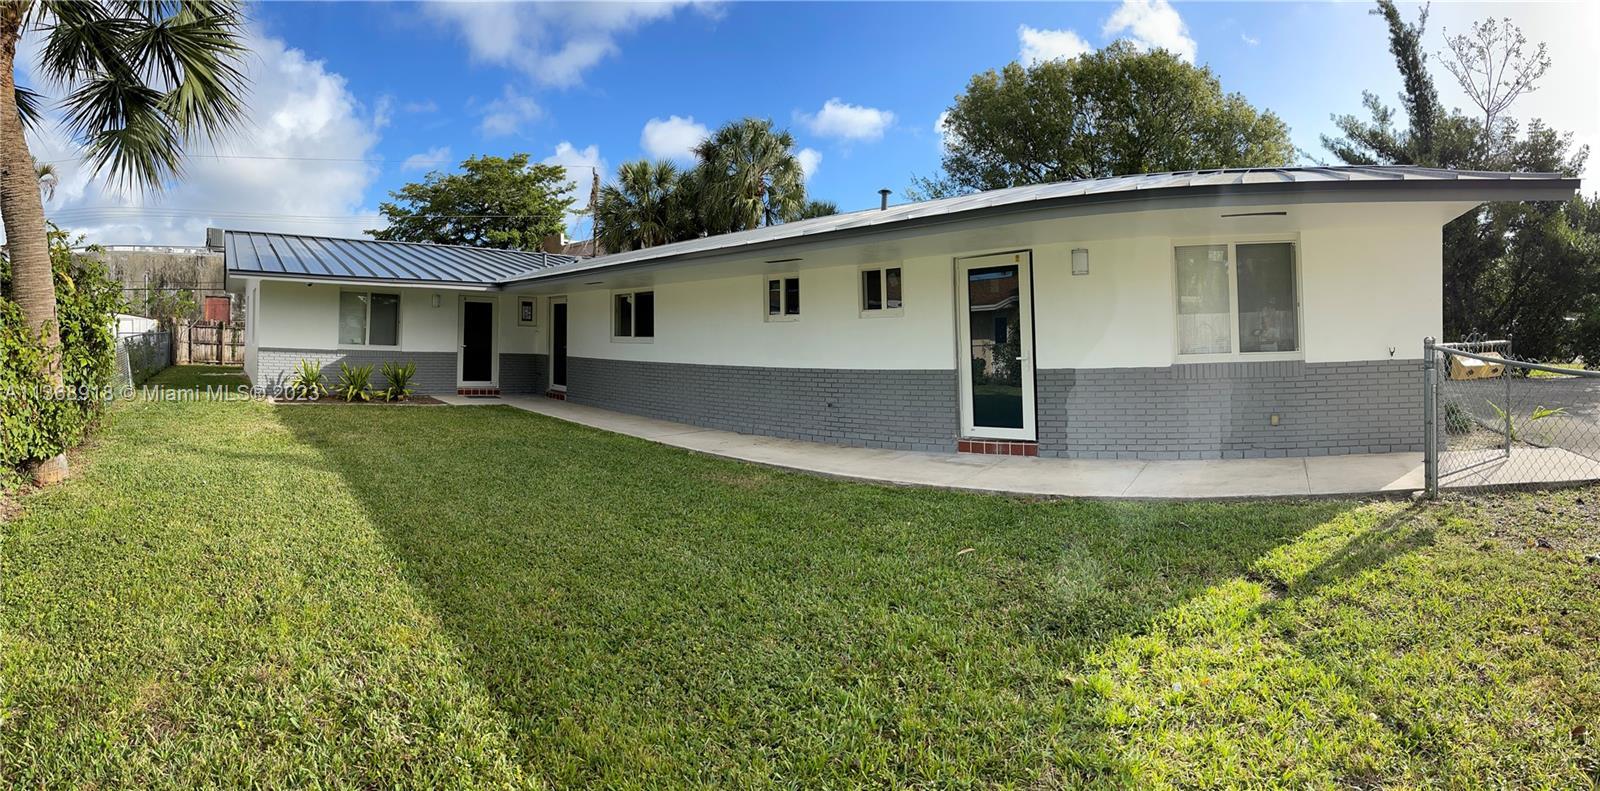 Rare Wilton Manors find, ideal for end user, investor, hybrid use with seasonal or short term rental